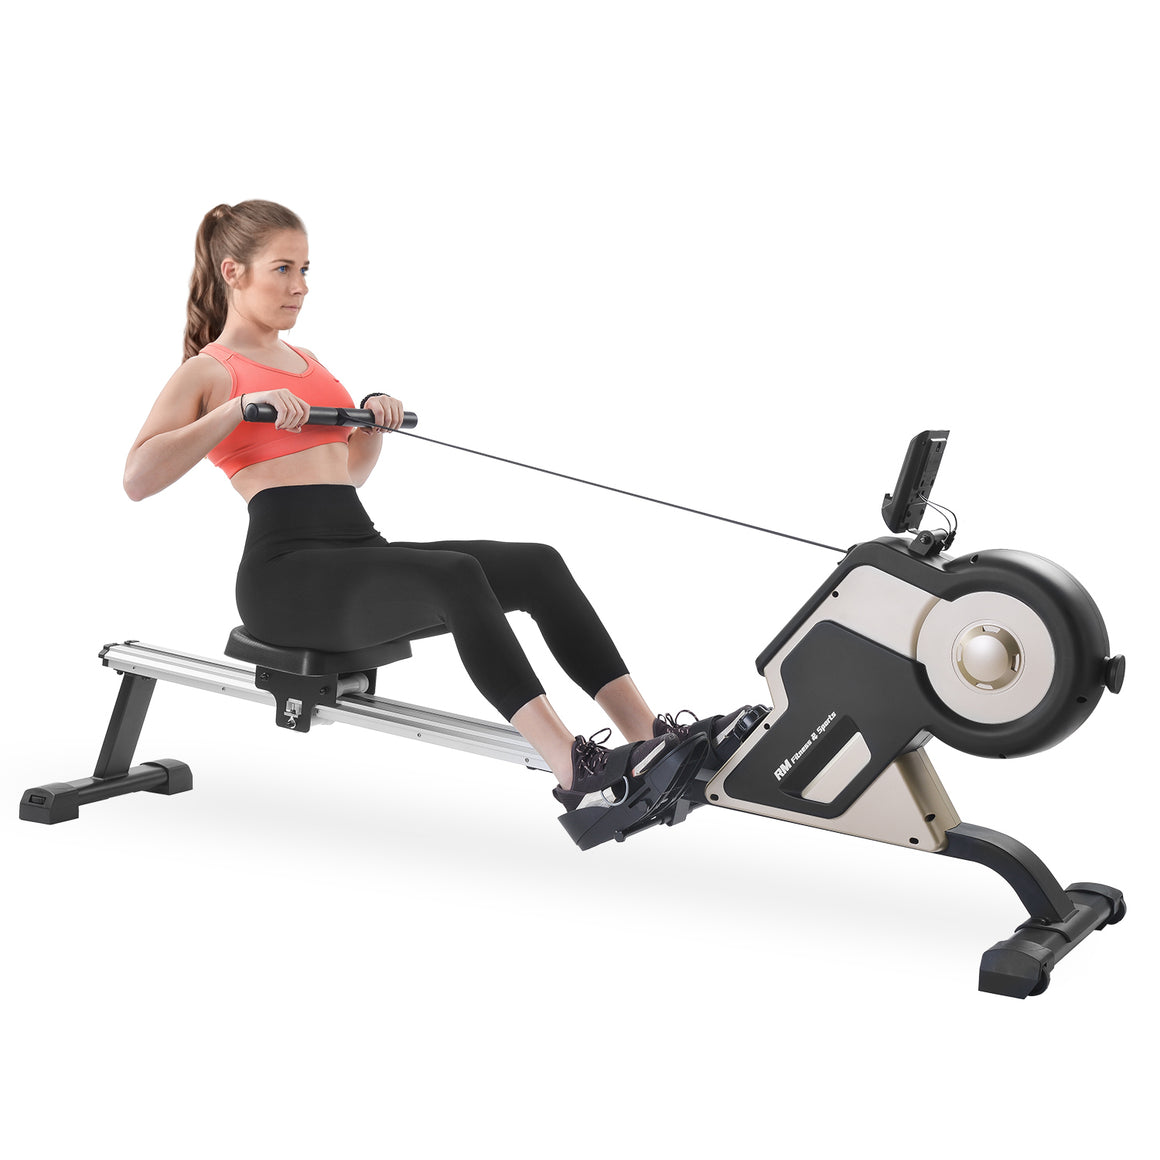 GT Magnetic Rowing Machine Compact Indoor Rower with Magnetic Tension System, LED Monitor and 8-level Resistance Adjustment Fitness Equipment for Home Gym US-1